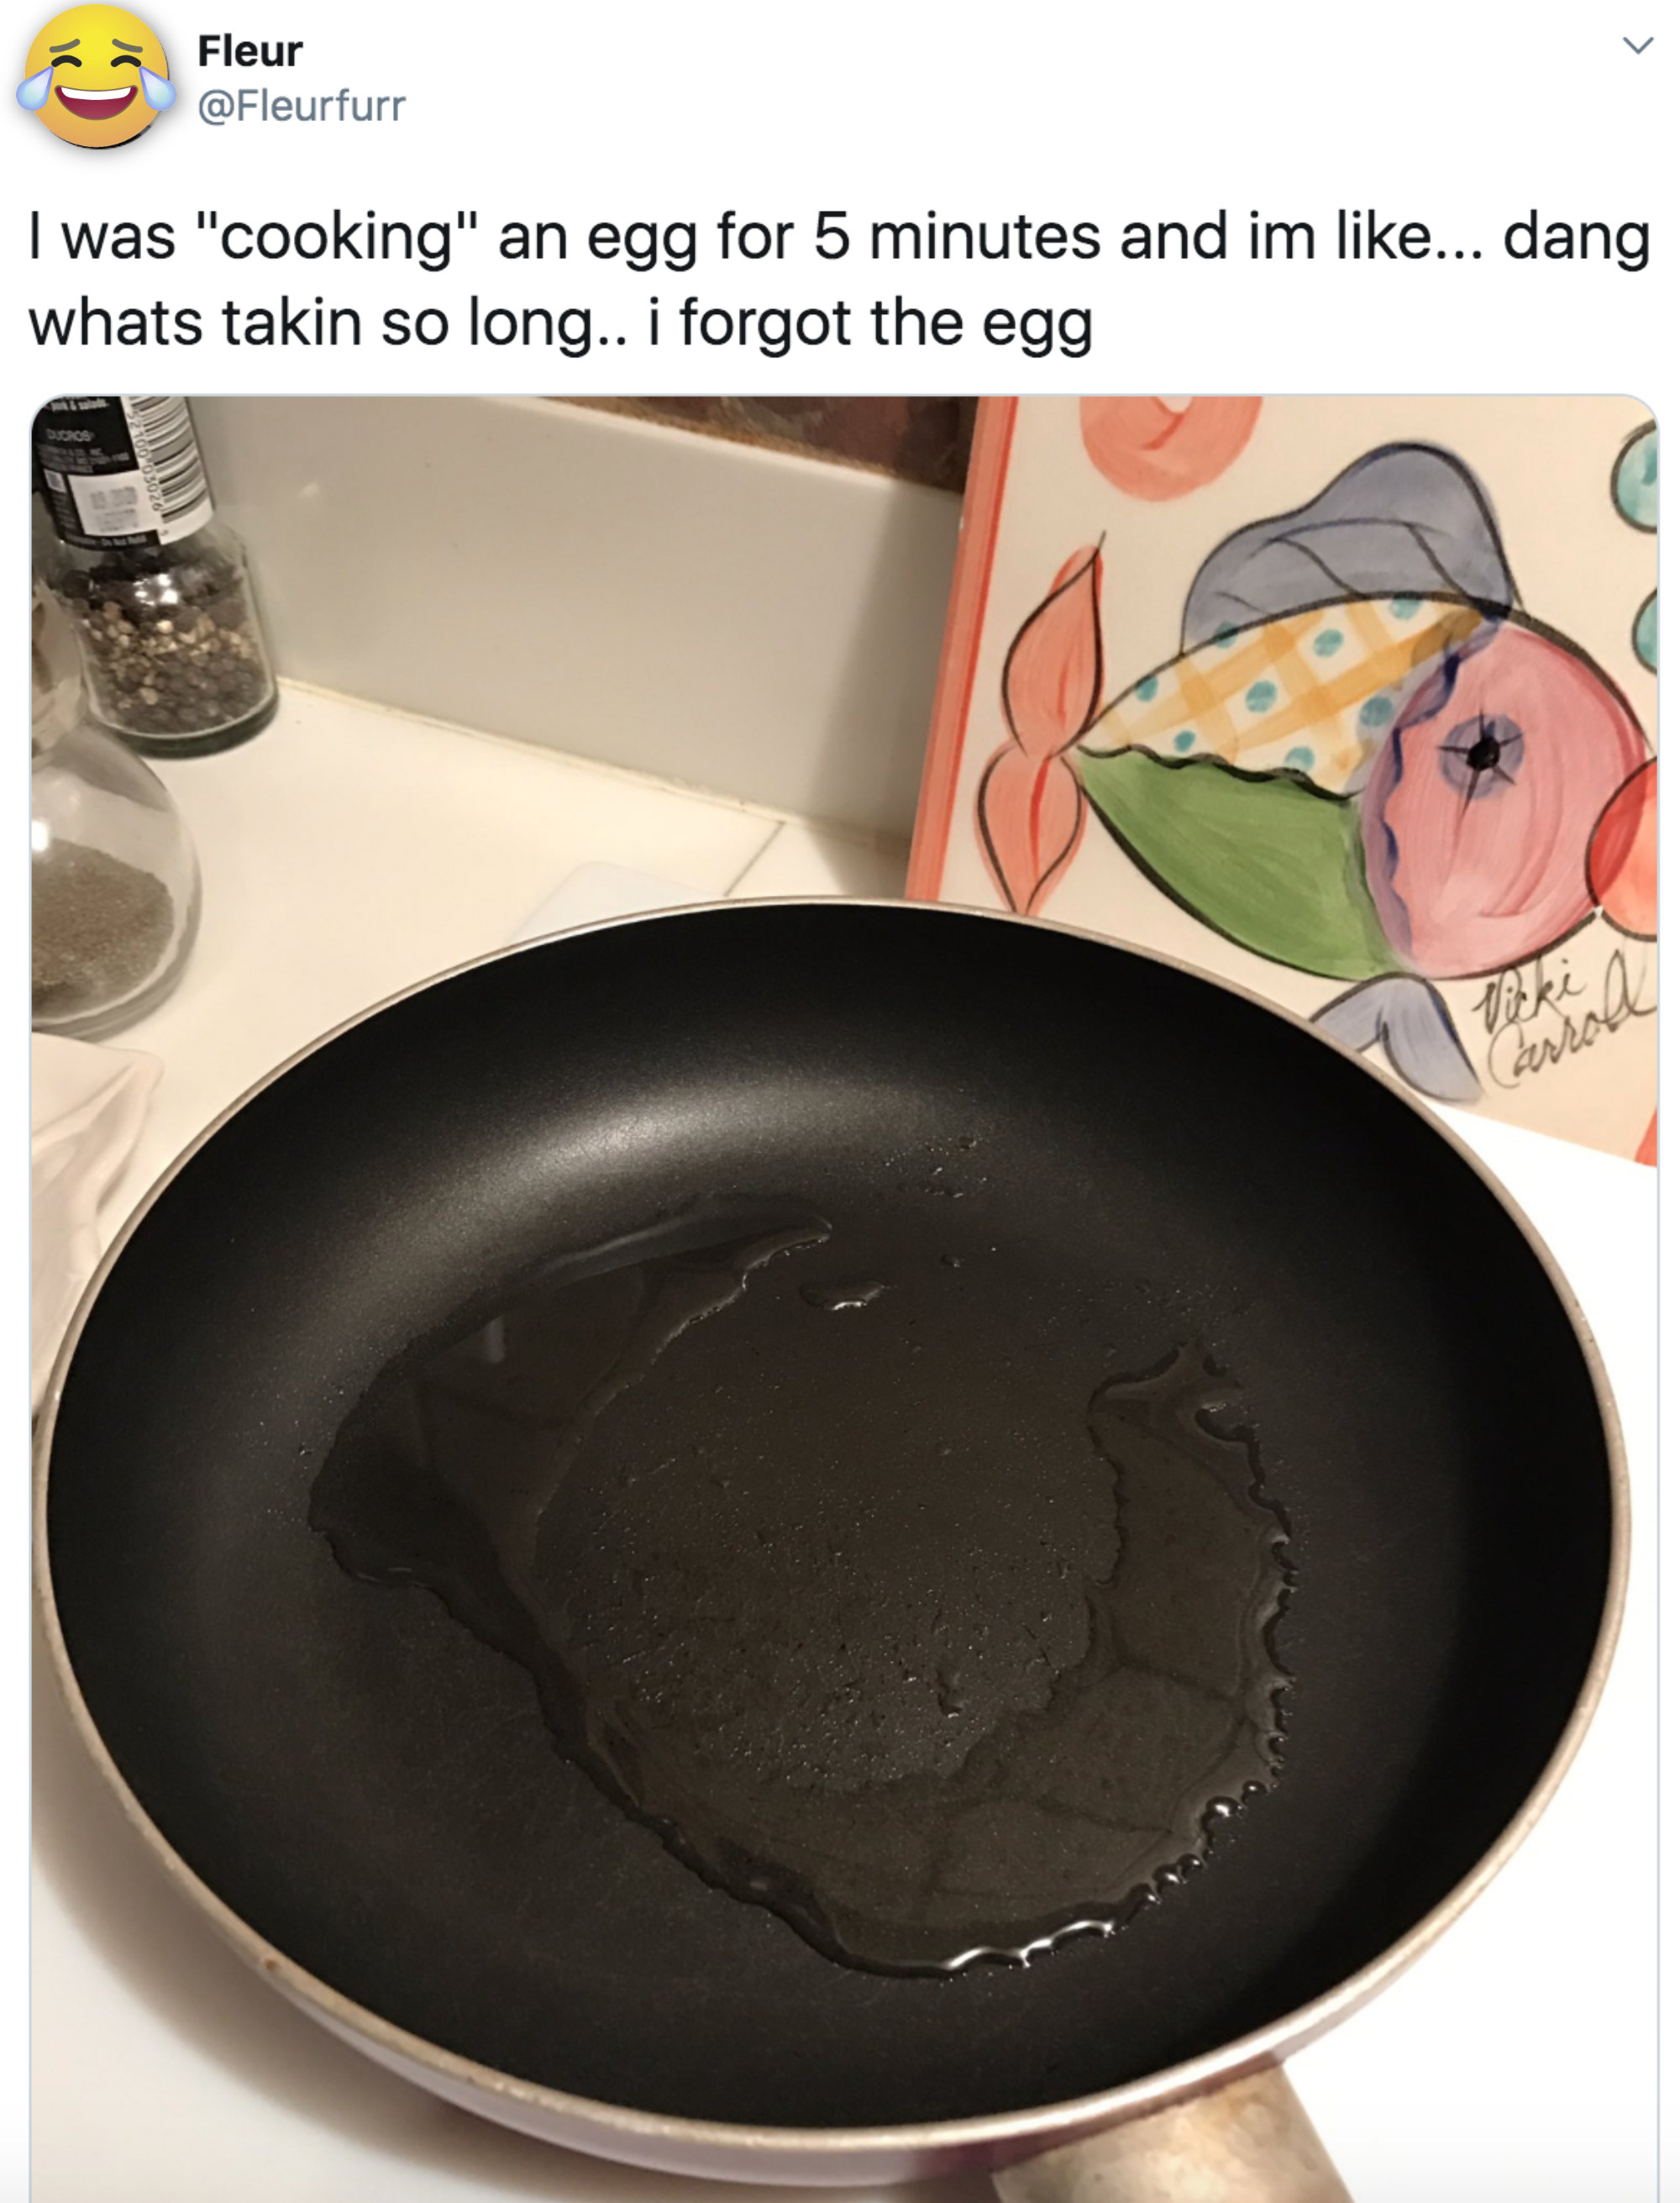 tweet about someone forgetting to cook an egg